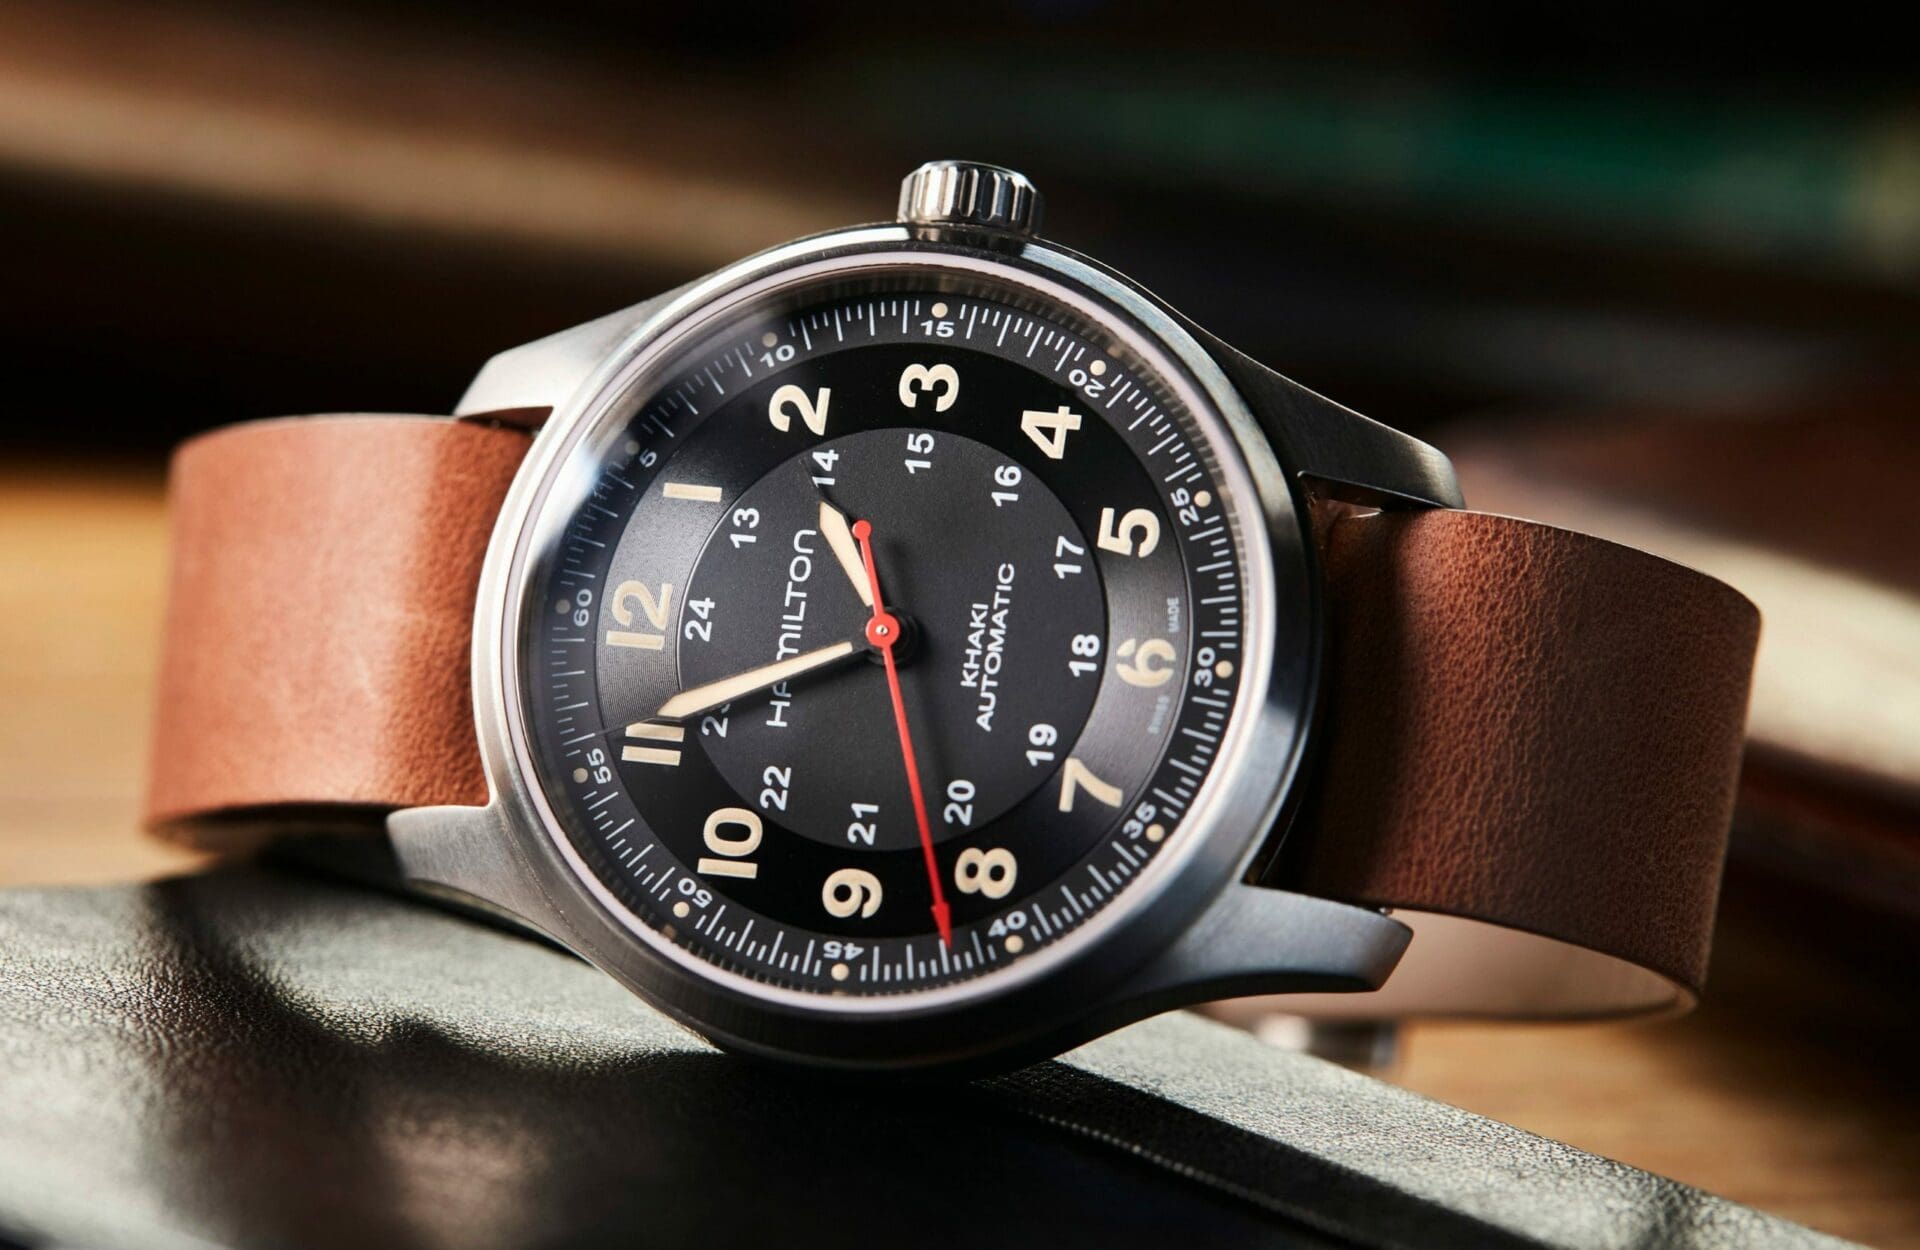 VIDEO: Hamilton is levelling up the Khaki Field Collection with the new Hamilton x Far Cry 6 Limited Edition Khaki Field Titanium